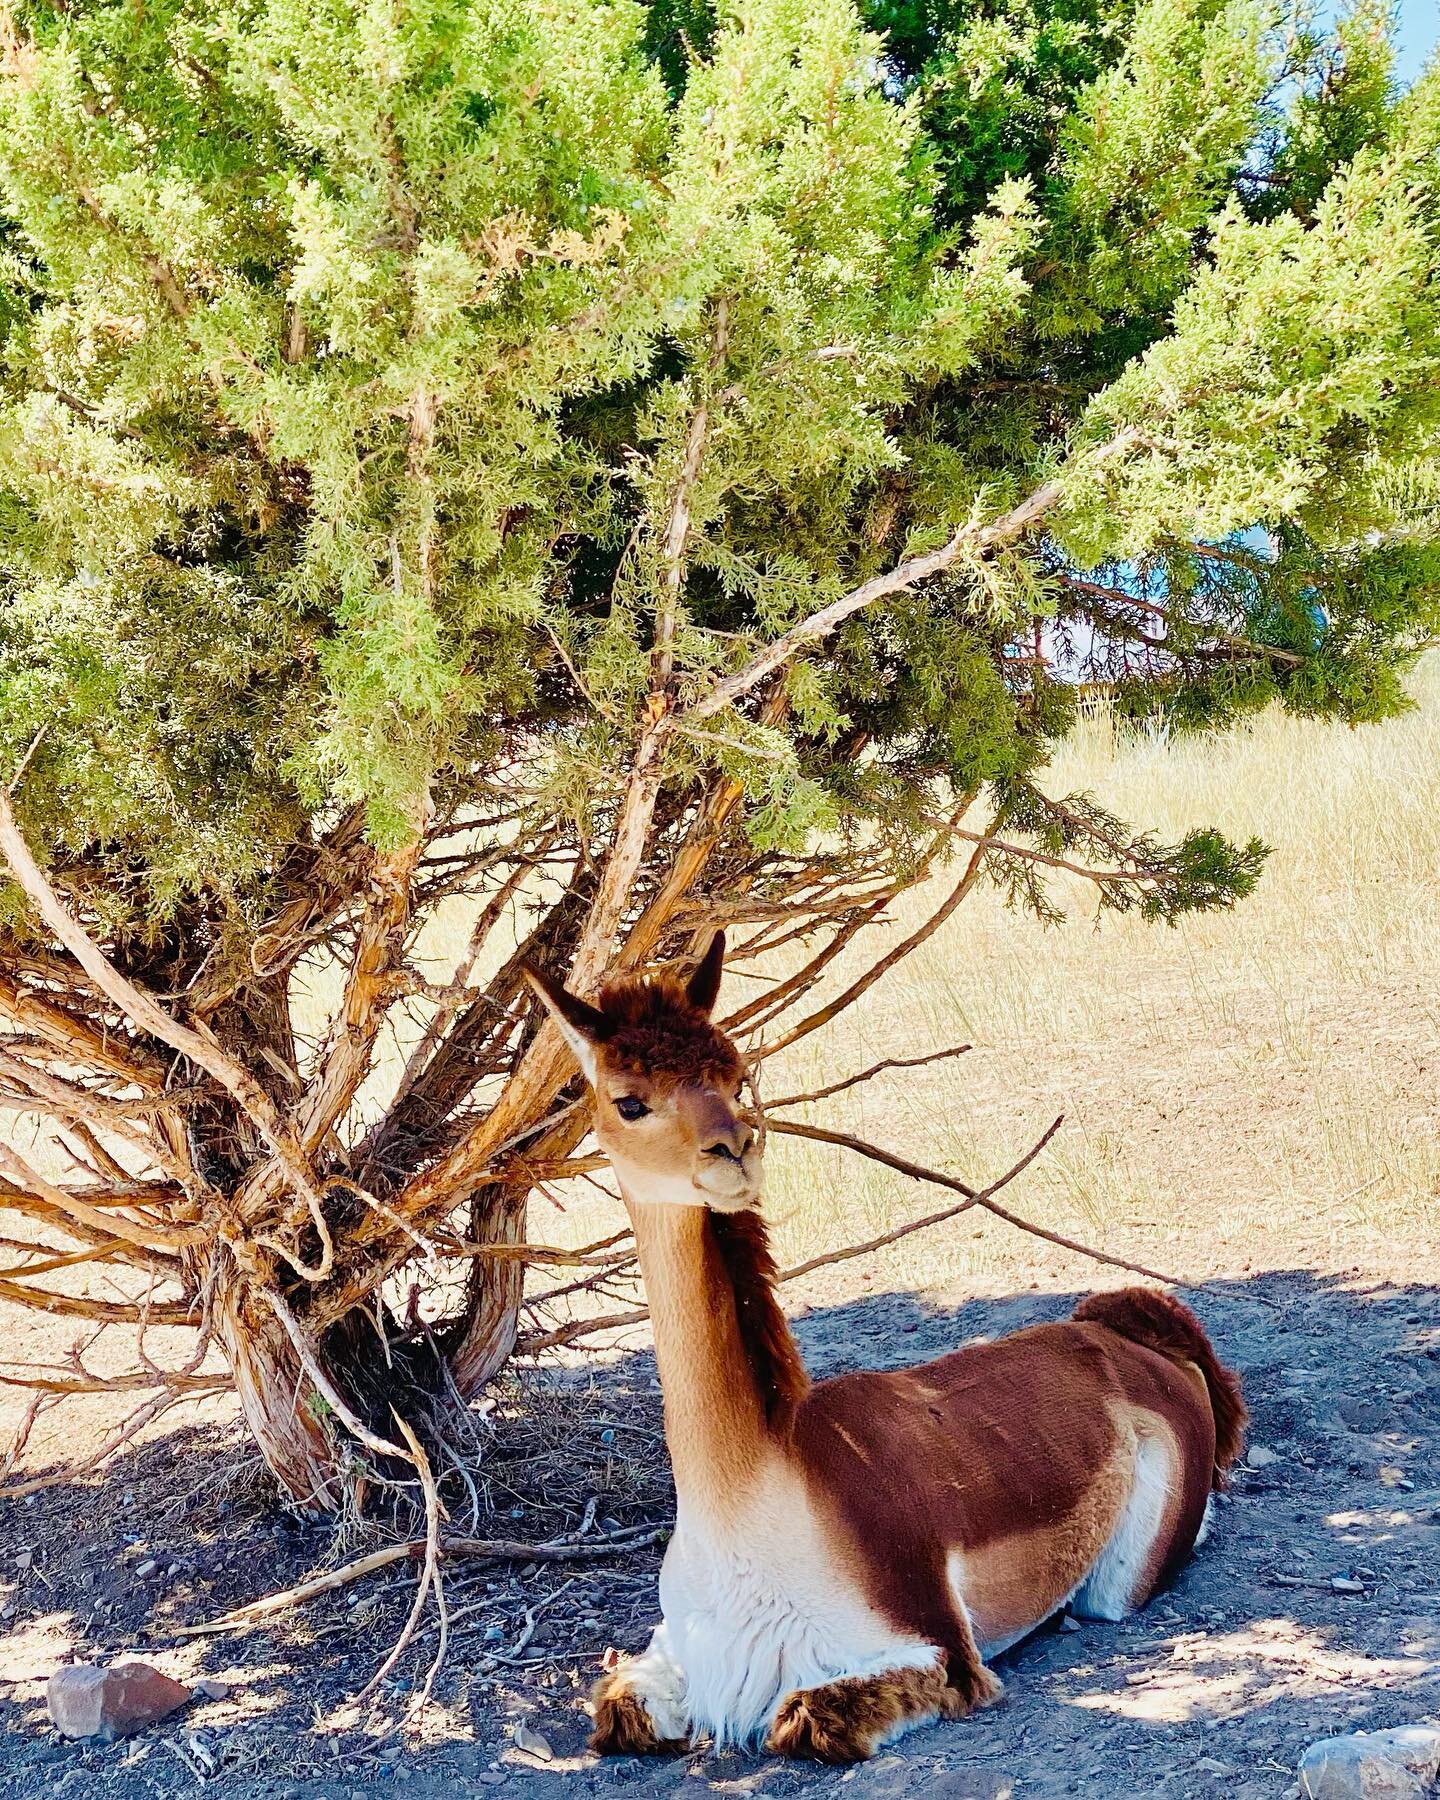 &ldquo;It&rsquo;s summer- you can find me chillin under the shade tree&rdquo;
-Isaac 

#vicu&ntilde;a